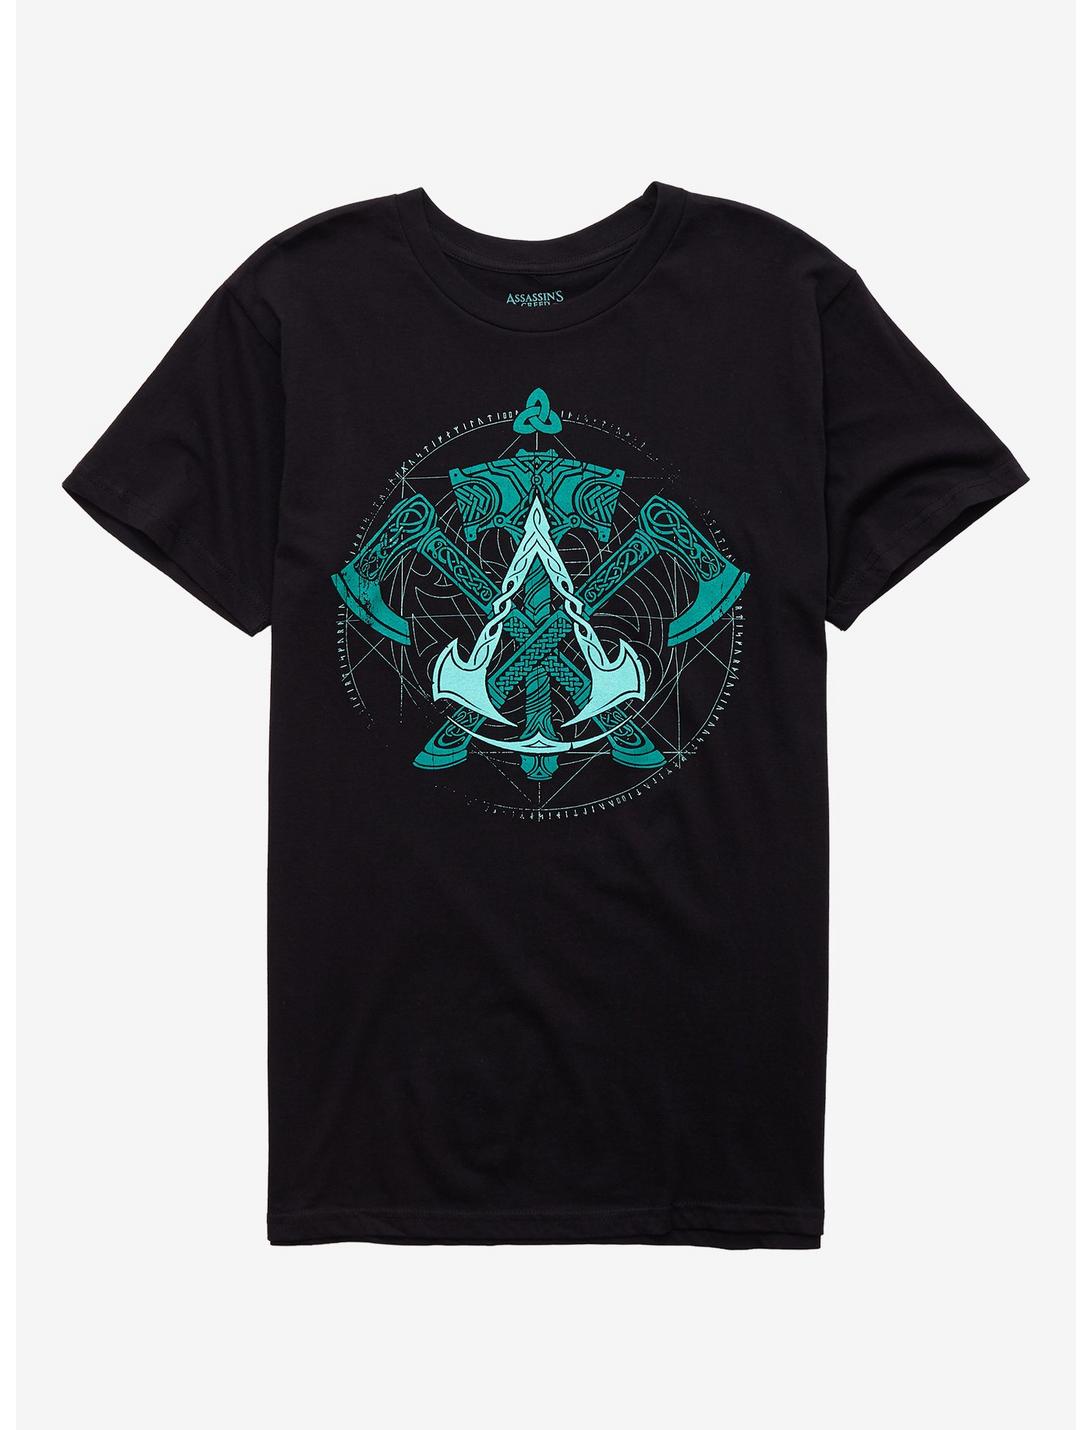 Assassin's Creed Valhalla Weapons T-Shirt, BLACK, hi-res